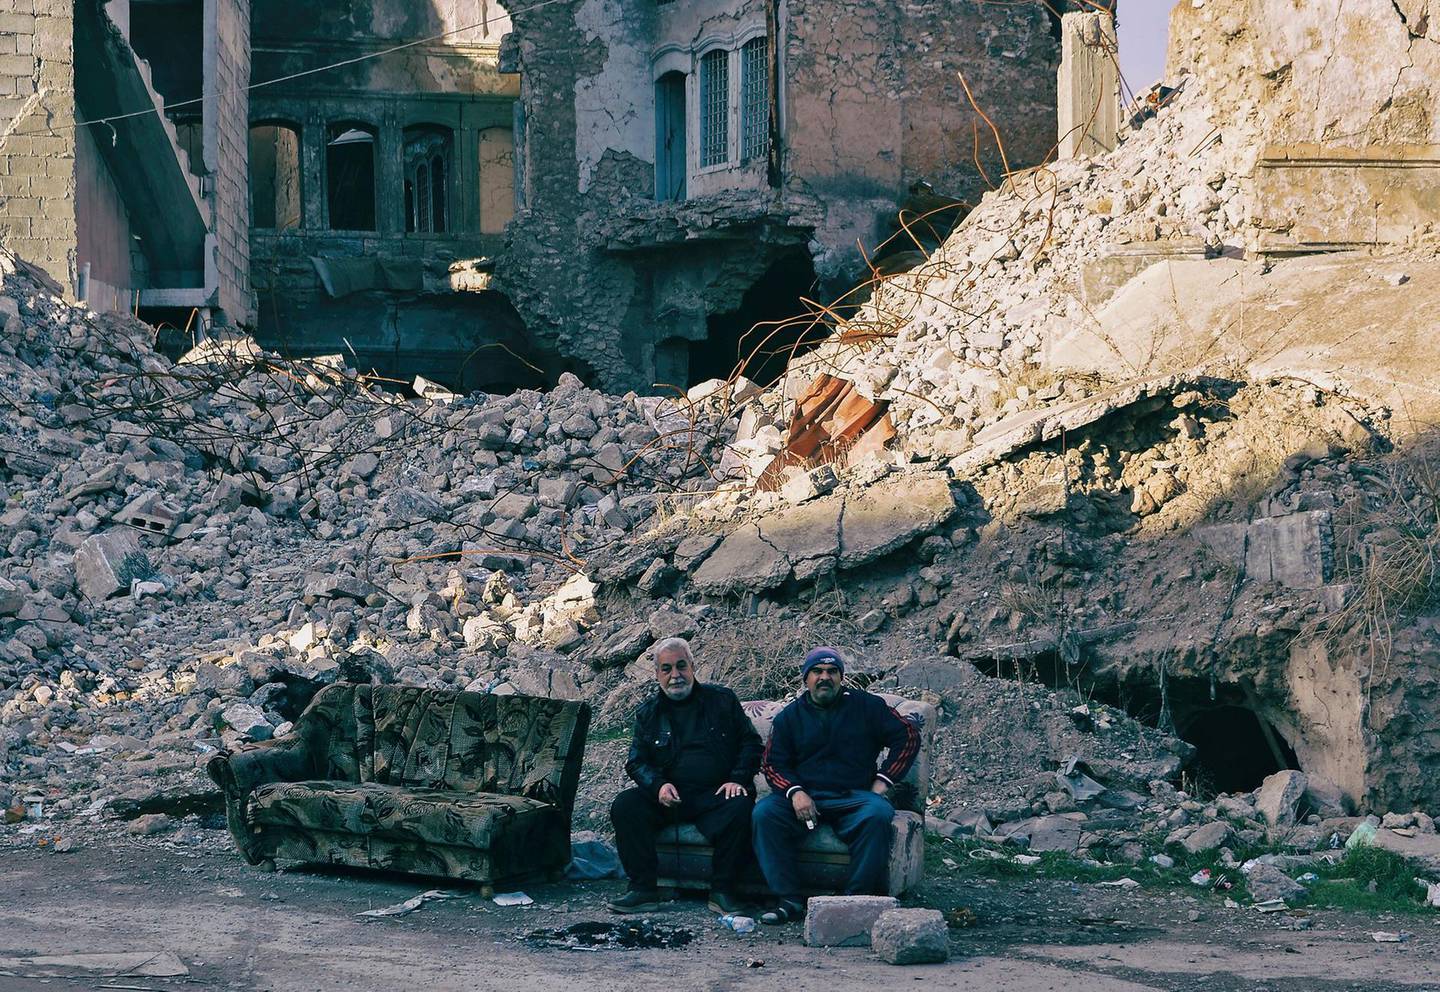 Iraqi men sit amidst debris of destroyed buildings in Iraq's northern city of Mosul on January 18, 2021. Once the historic heart of Iraq's Mosul, the Old City has lain in ruins for years. With rebuilding unlikely and the economy in a tailspin, homeowners are itching to sell. The single-family homes along the banks of the river Tigris, which divides Mosul in two, have remained largely untouched since Iraqi troops ousted the Islamic State group from the northern city in the summer of 2017. / AFP / Zaid AL-OBEIDI
